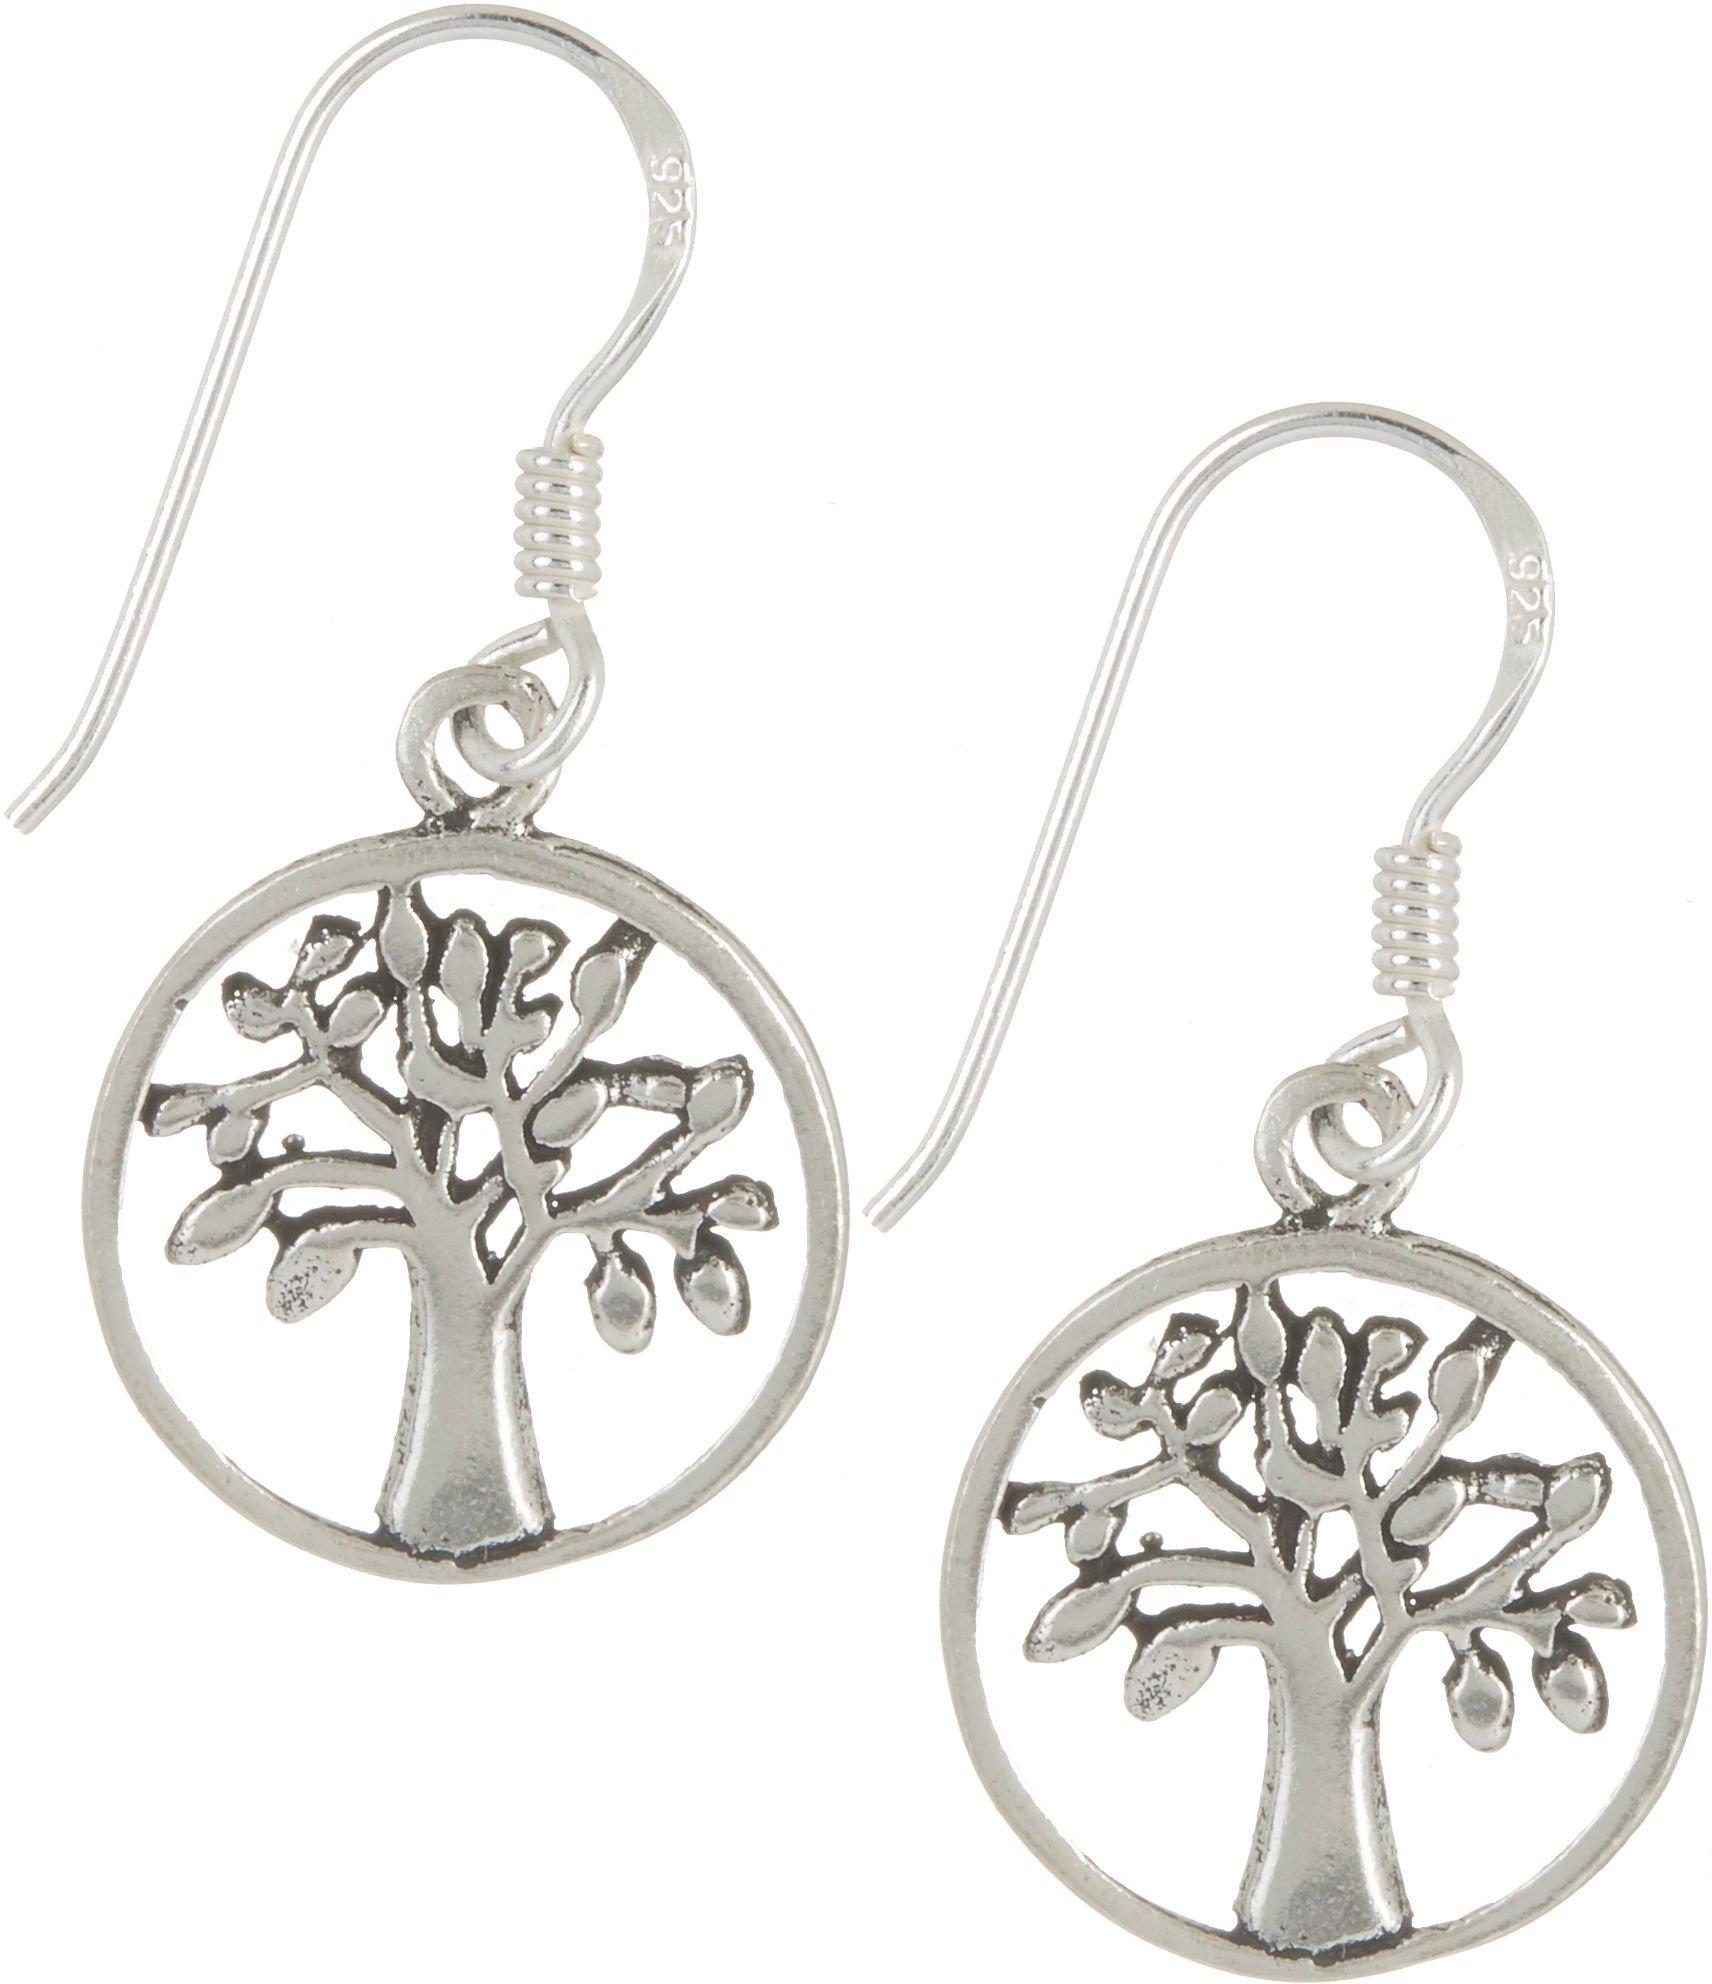 Piper & Taylor Tree Of Life Earrings